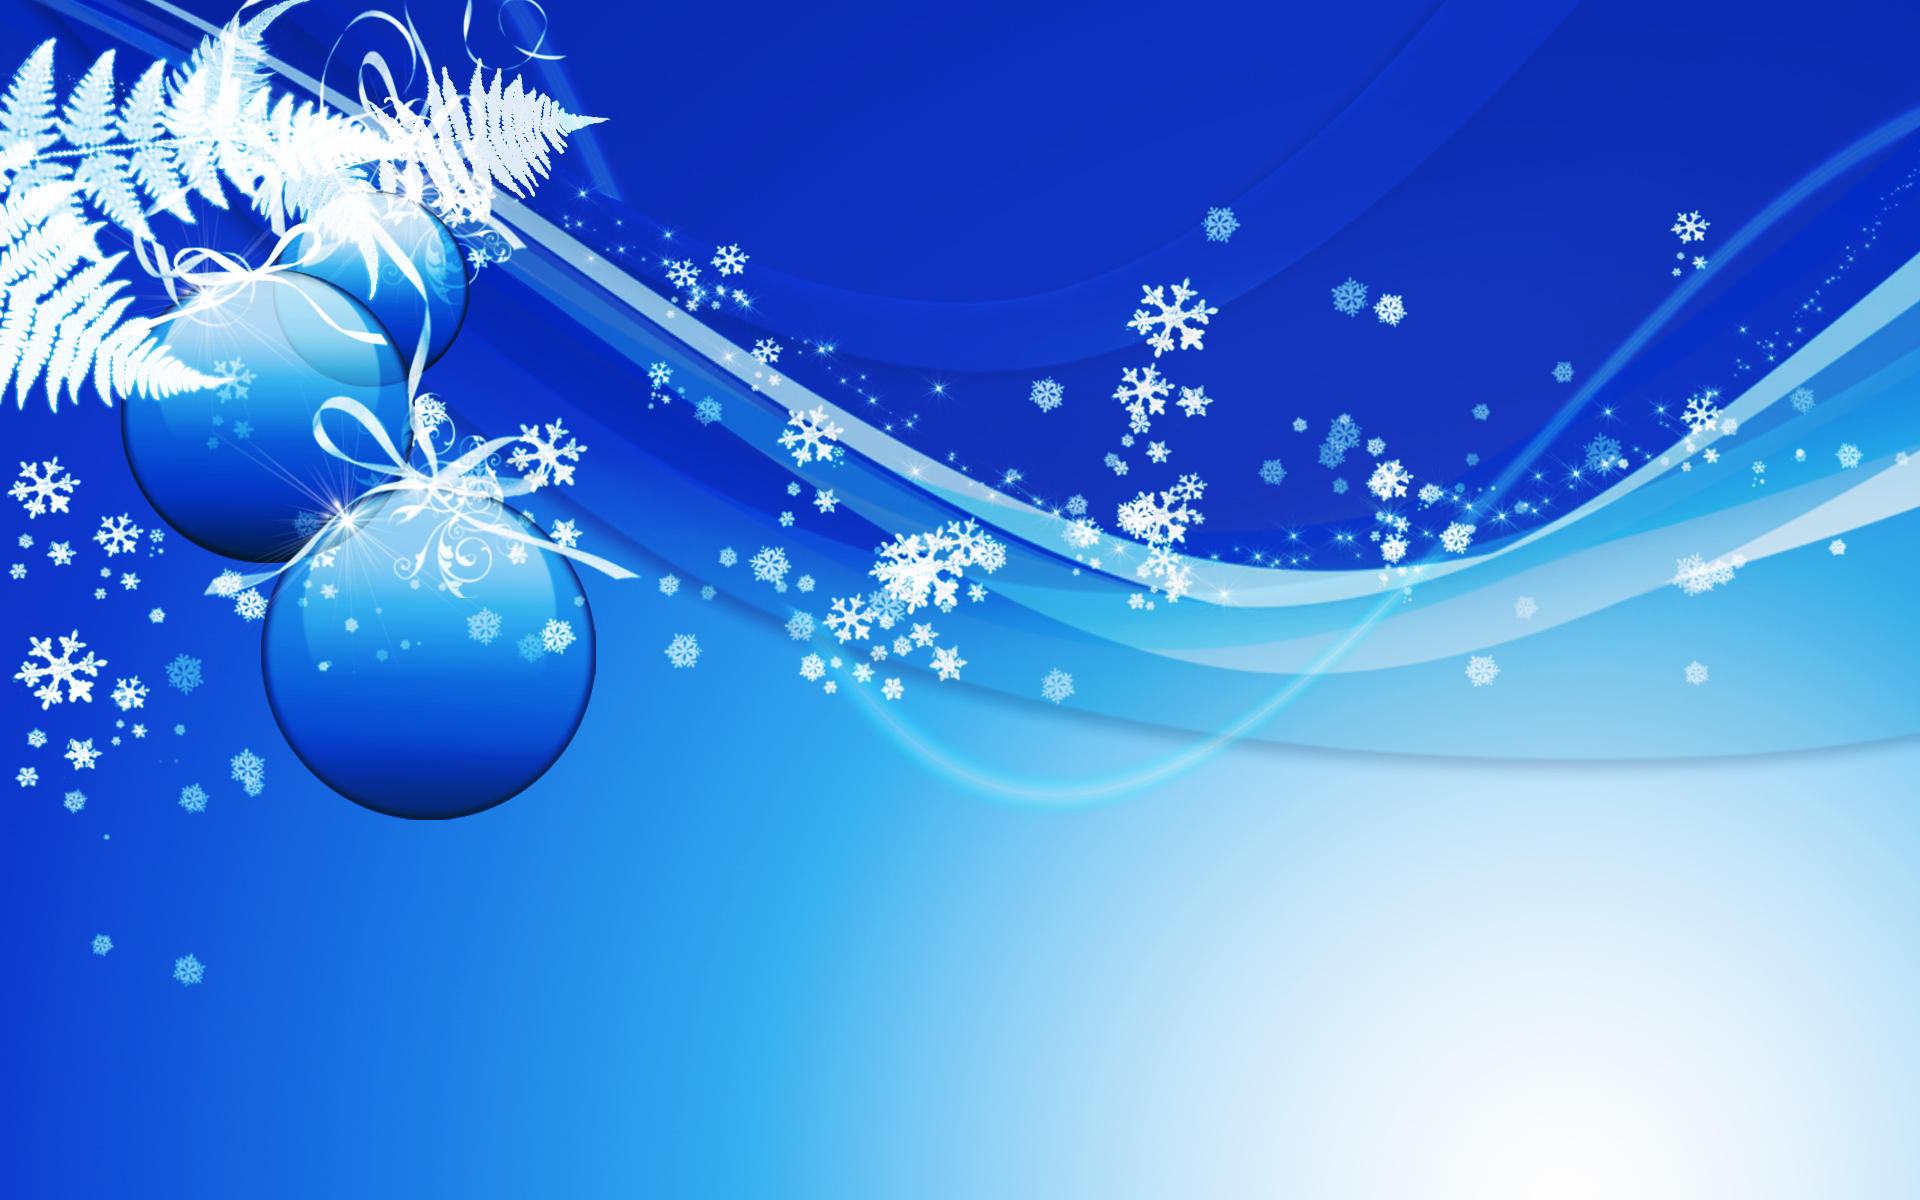 Free Holiday Backgrounds Image - Wallpaper Cave